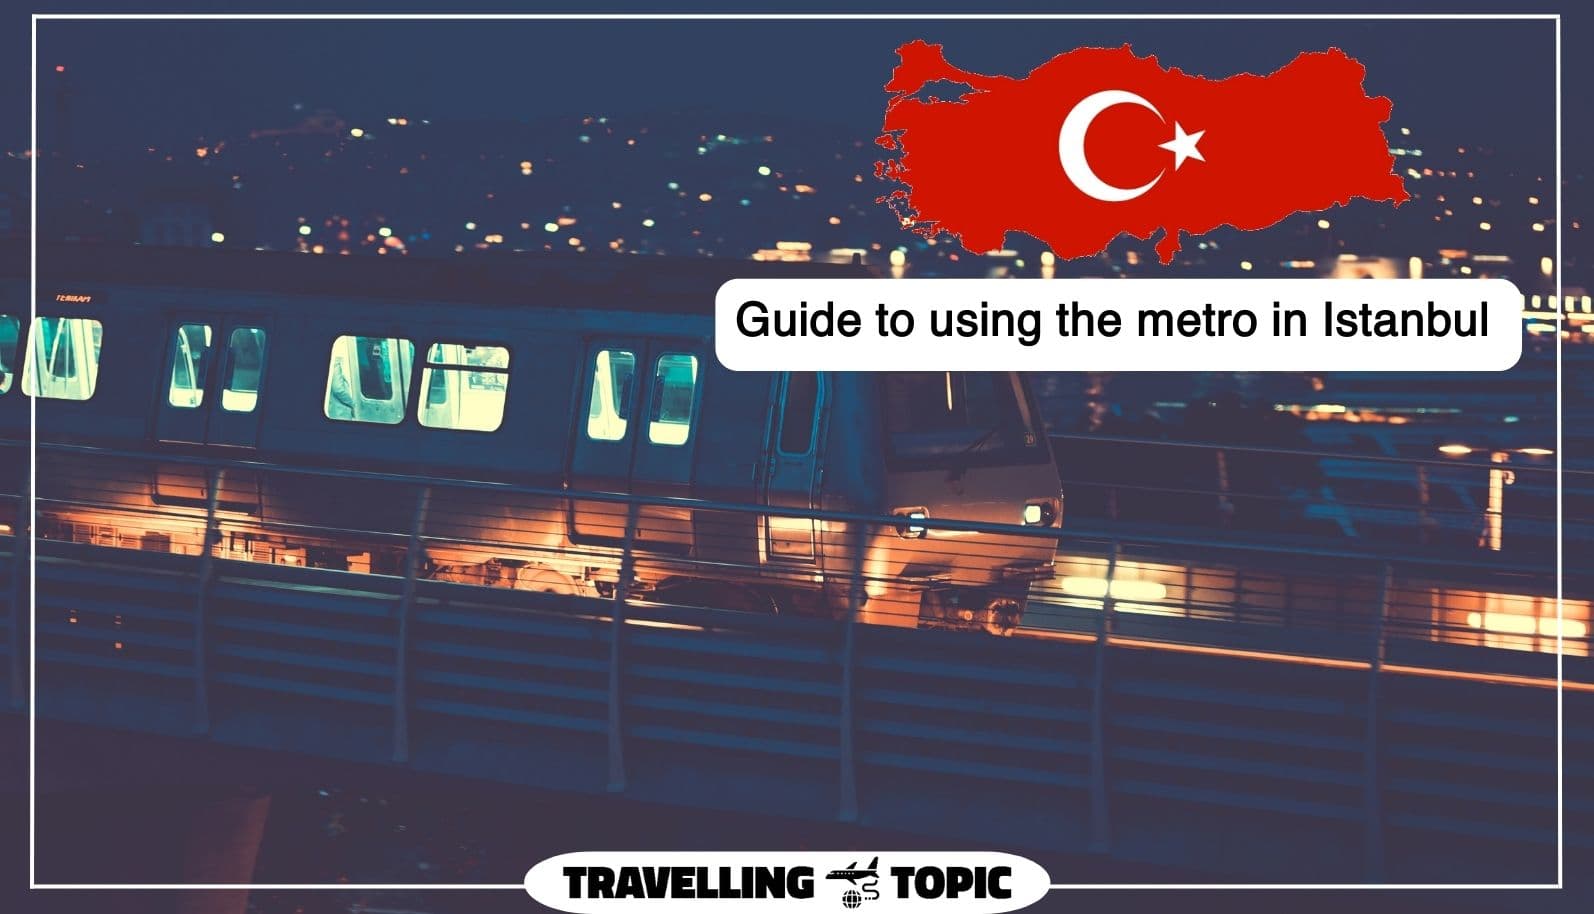 Guide to using the metro in Istanbul